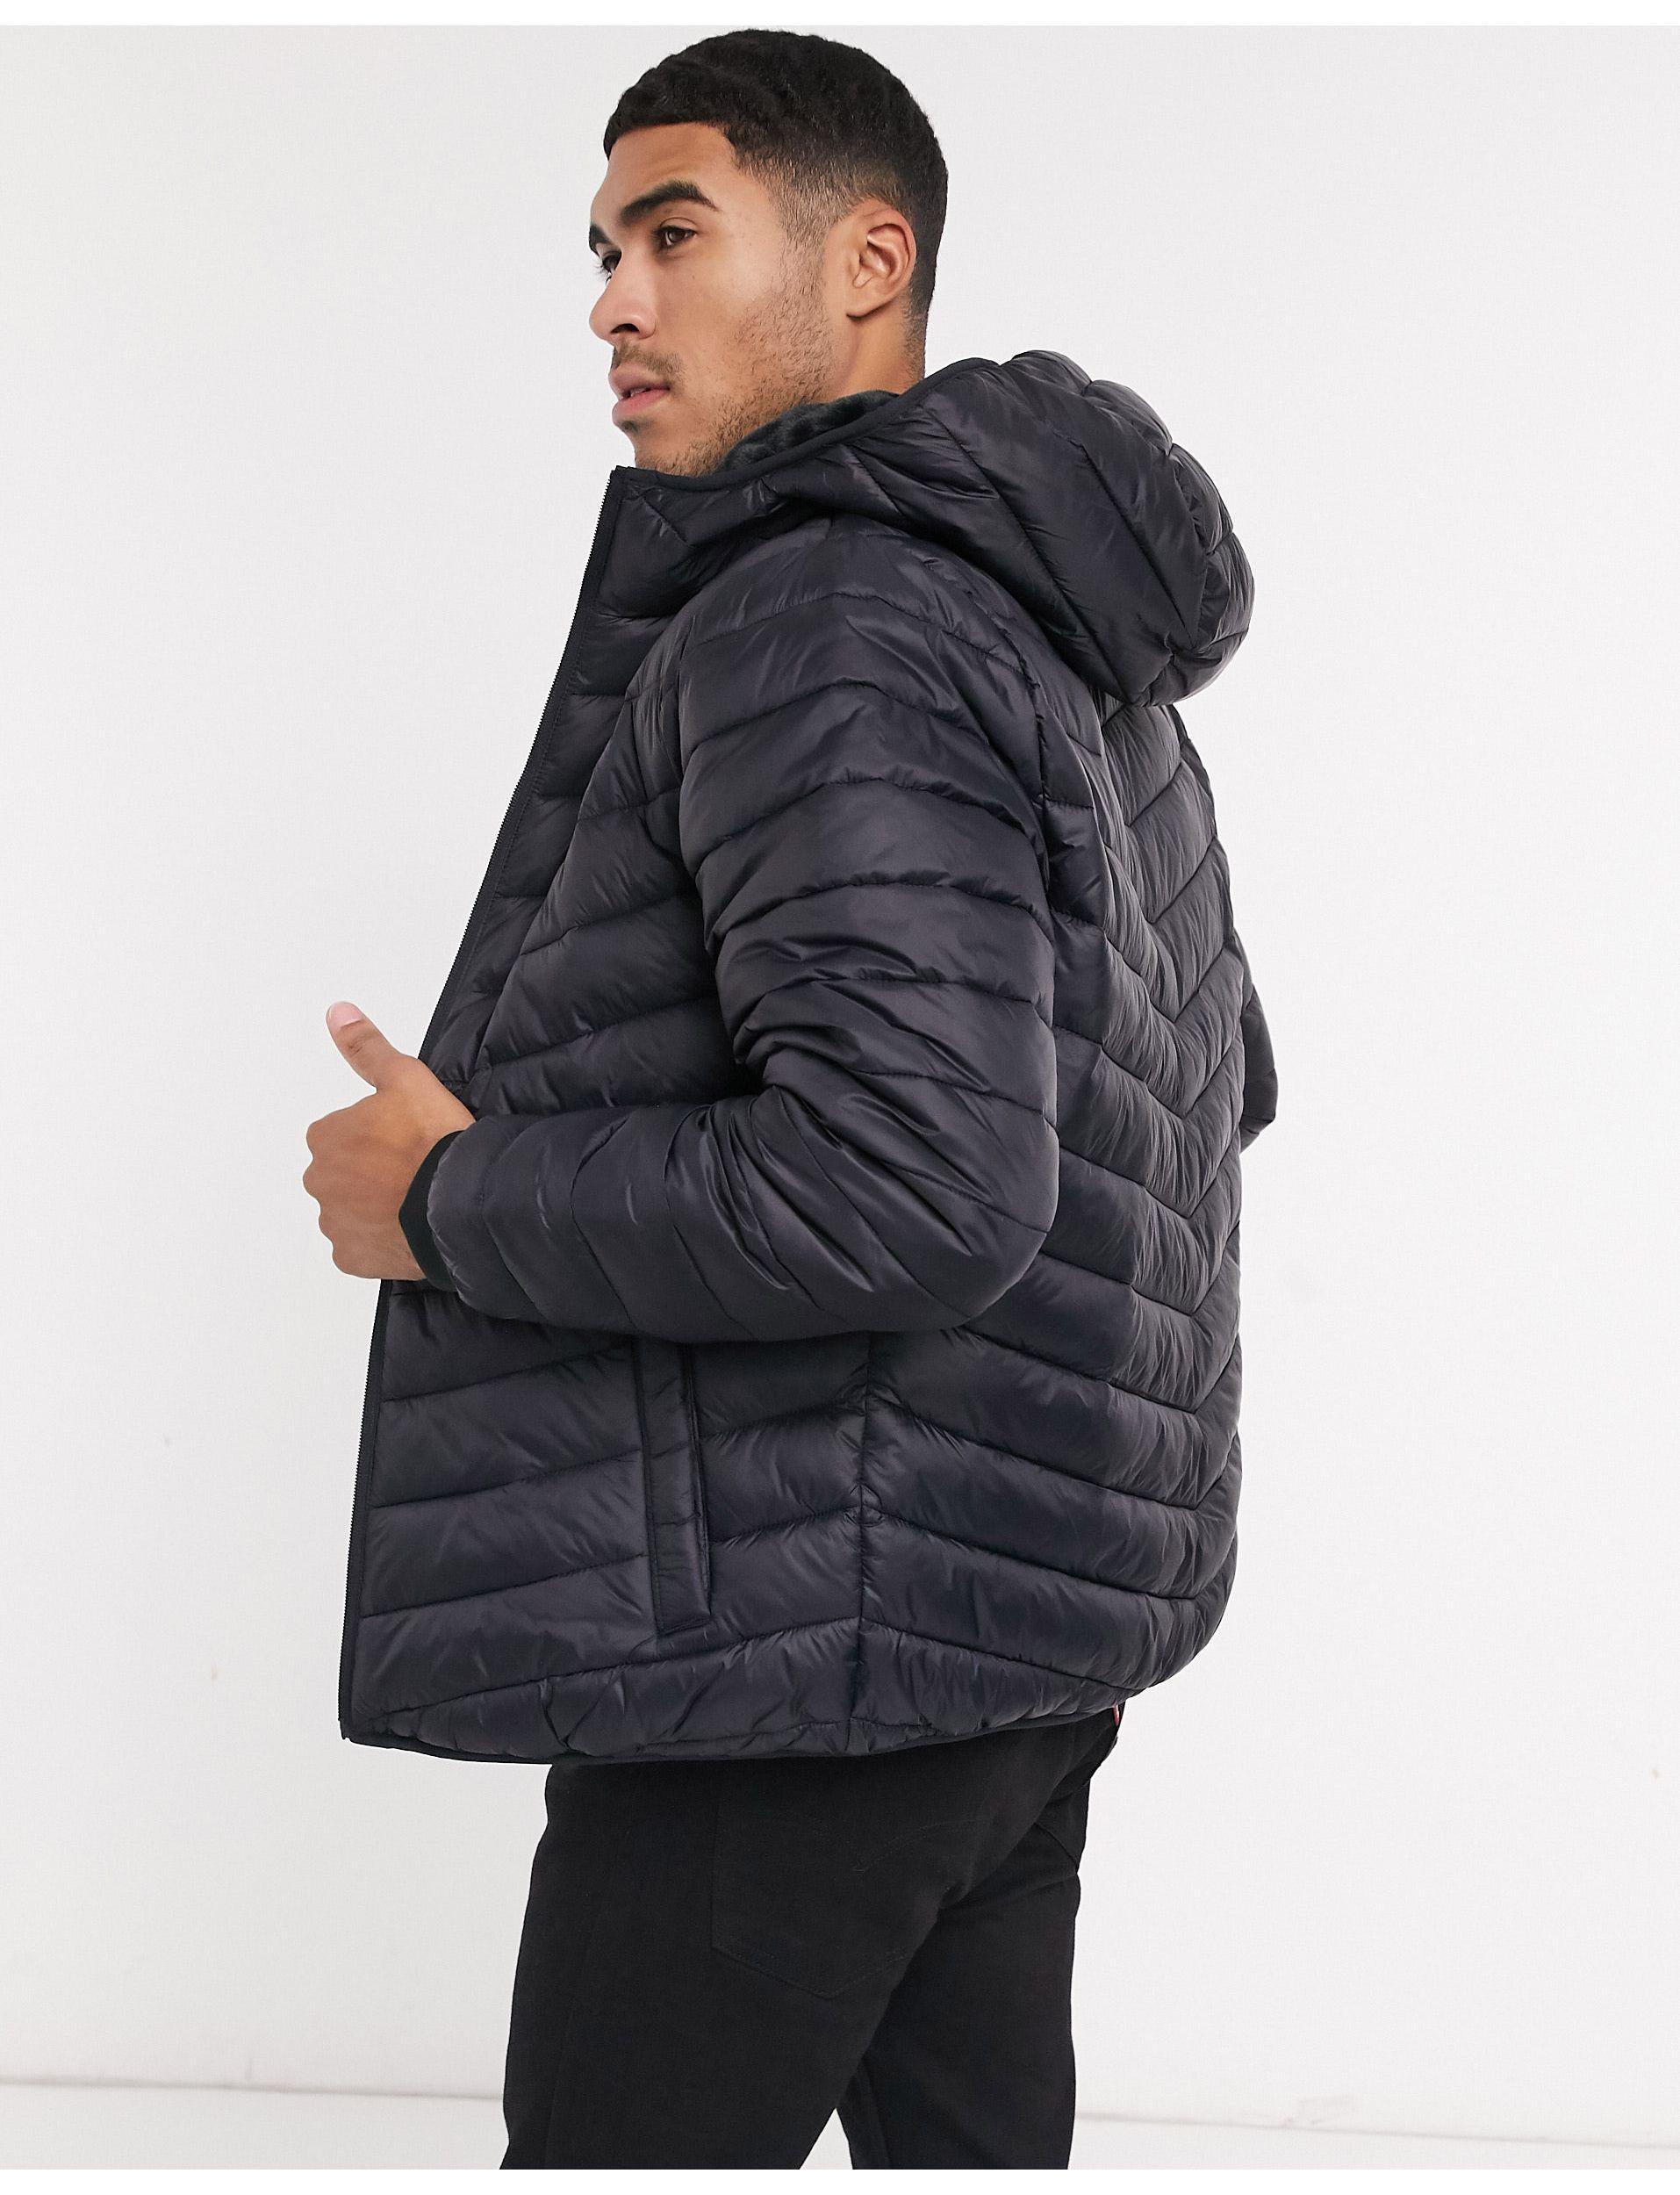 Hollister Cozy Lined Hooded Puffer Jacket in Black for Men